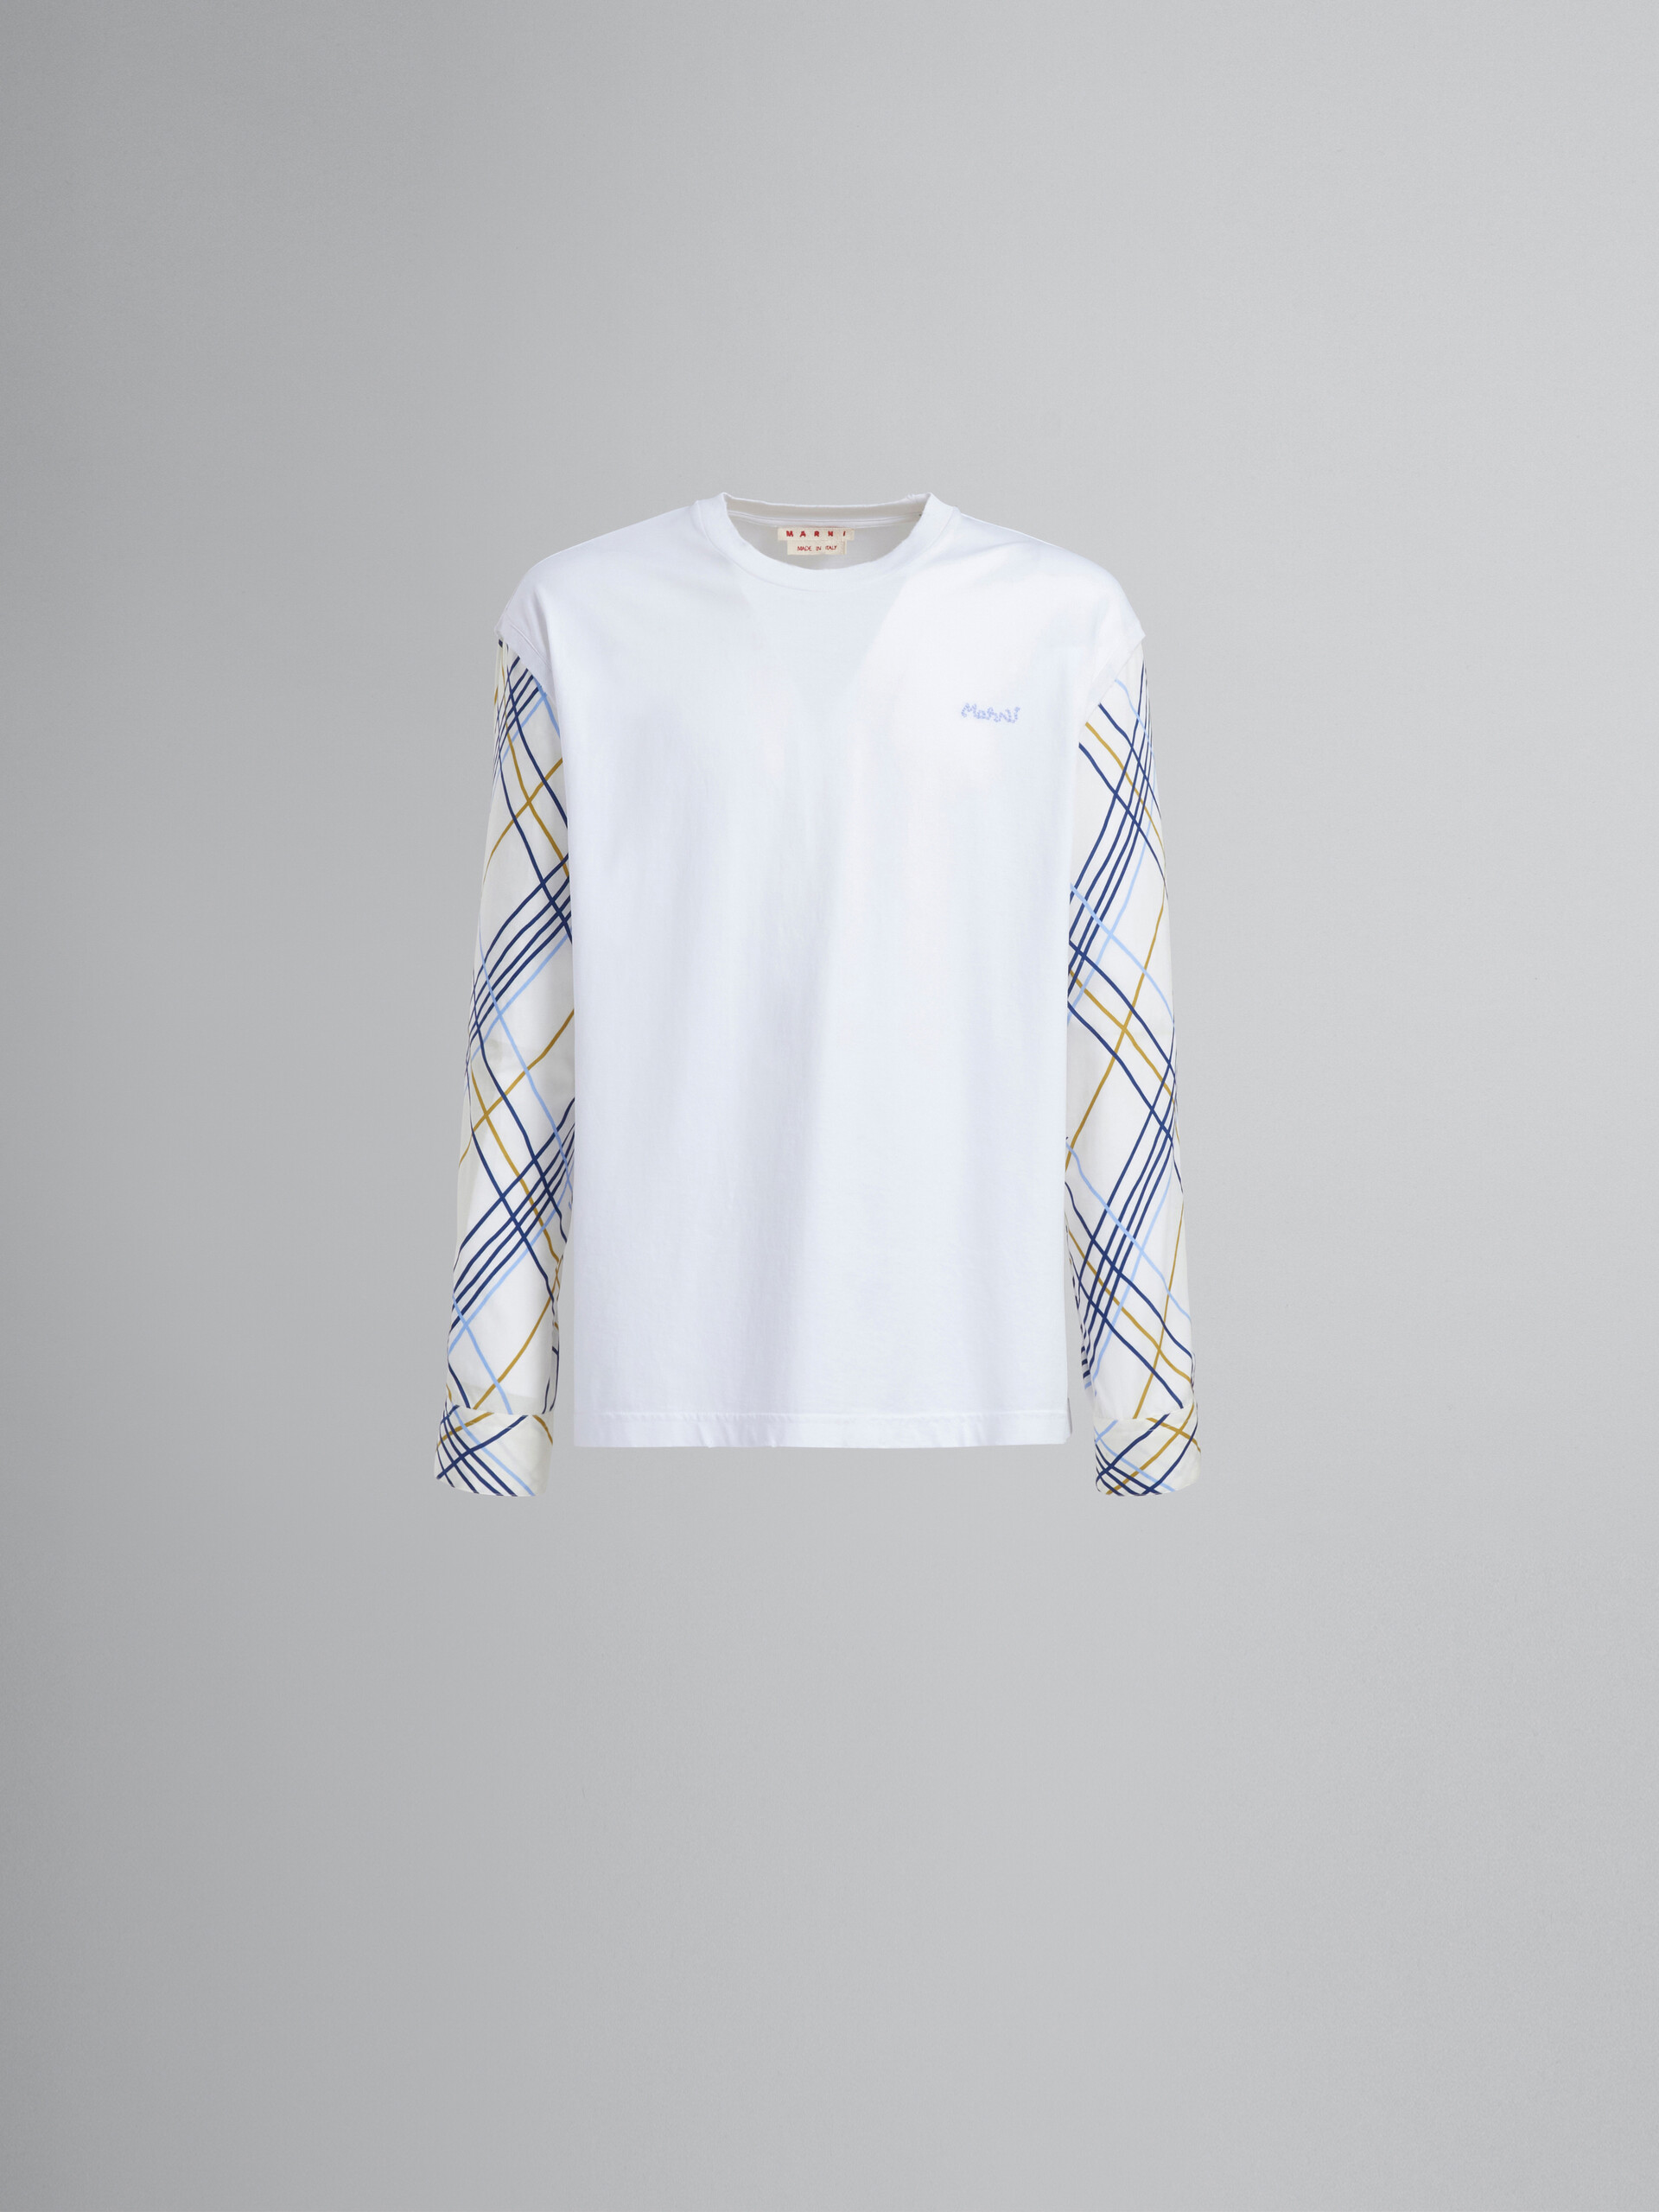 White cotton T-shirt with contrasting sleeves - T-shirts - Image 1